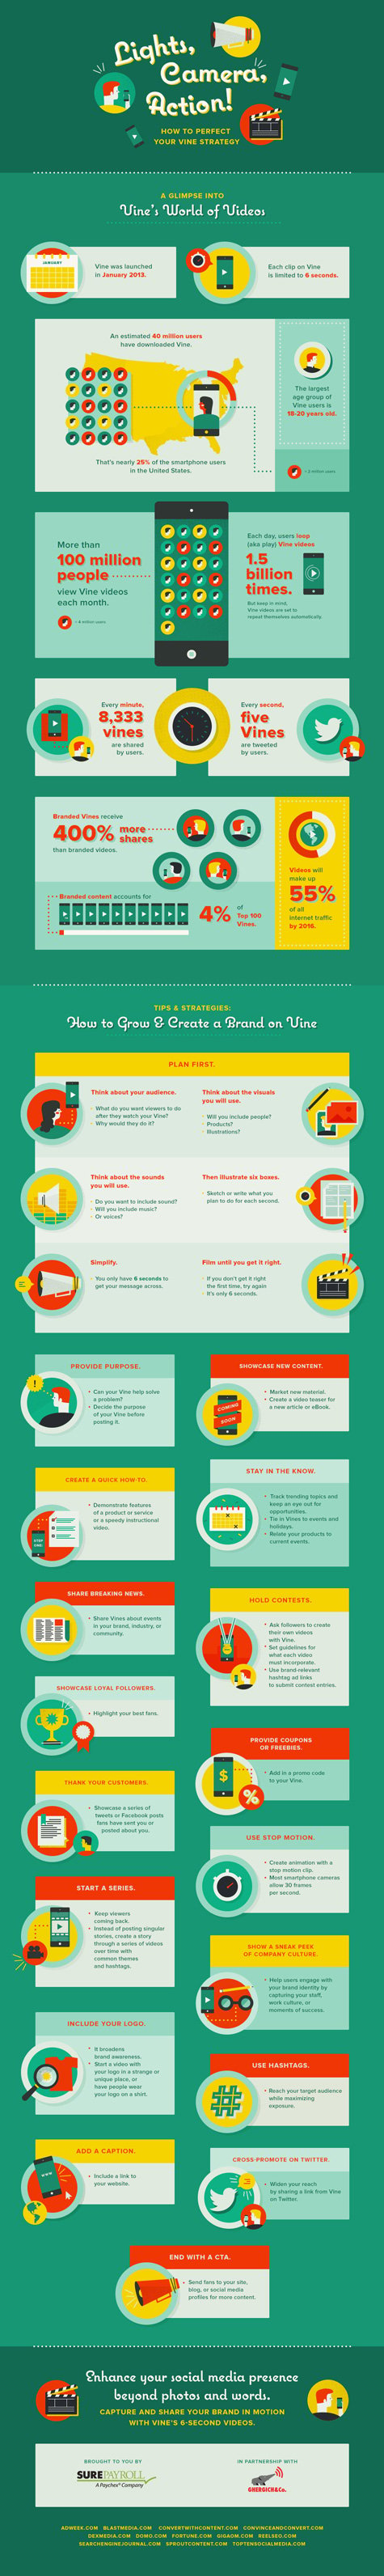 lights camera action how to perfect your vine strategy infographic 475